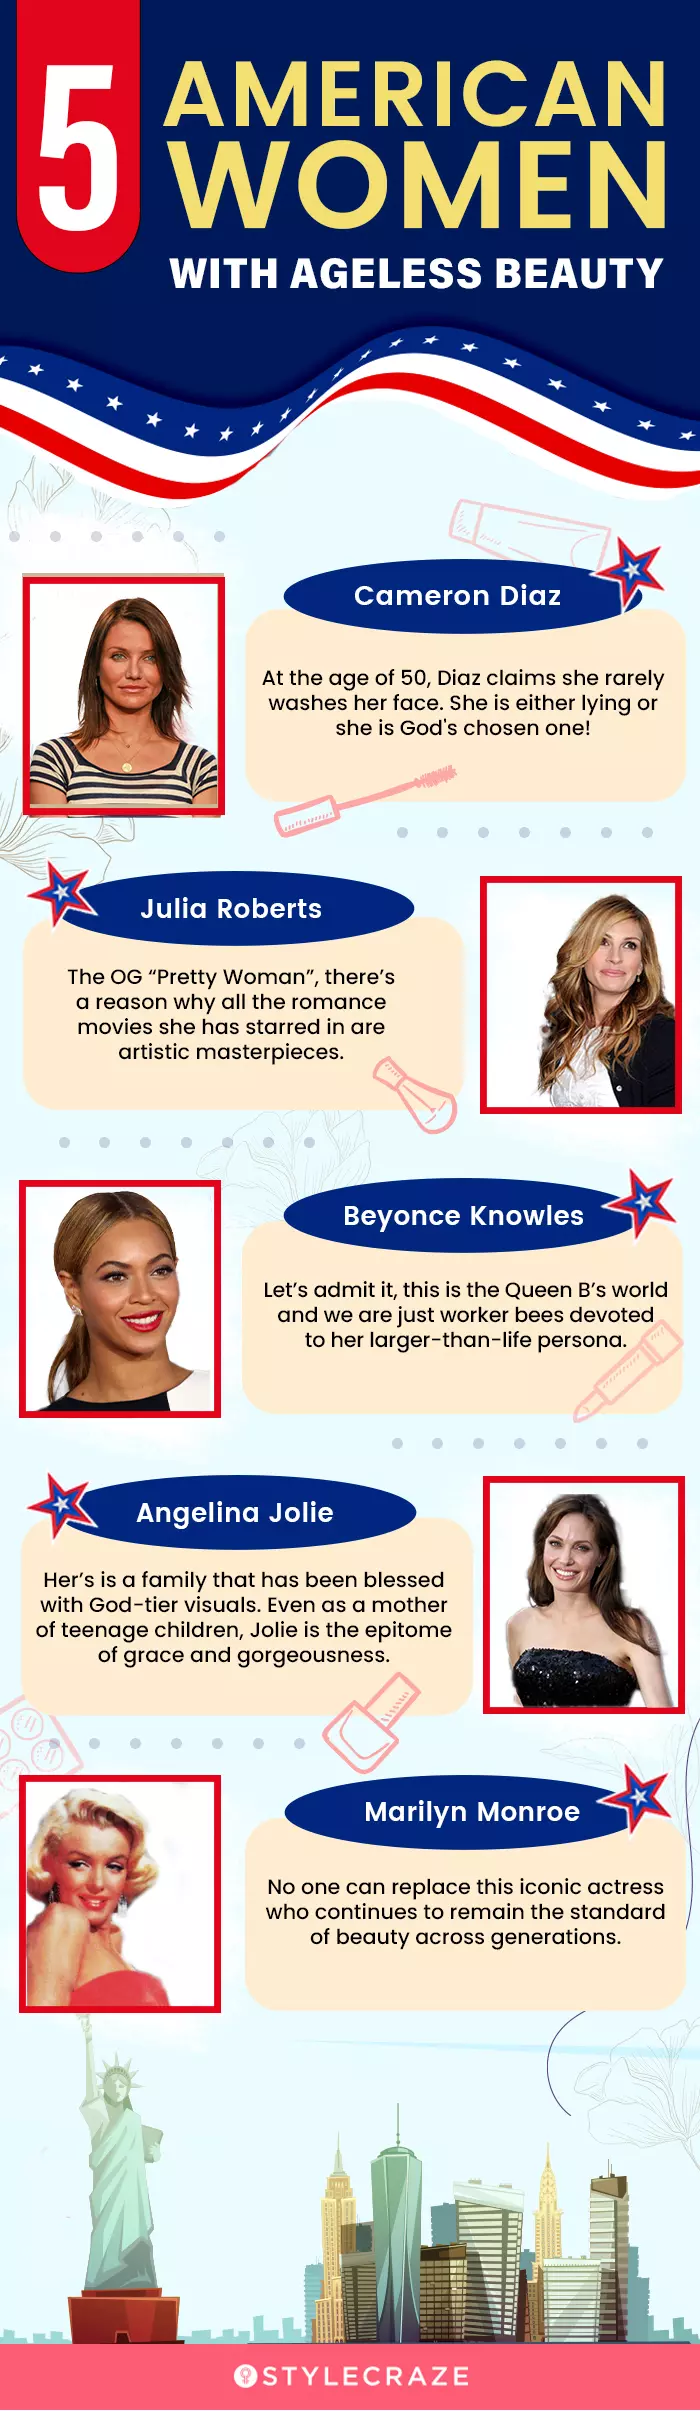 5 american women with ageless beauty (infographic)